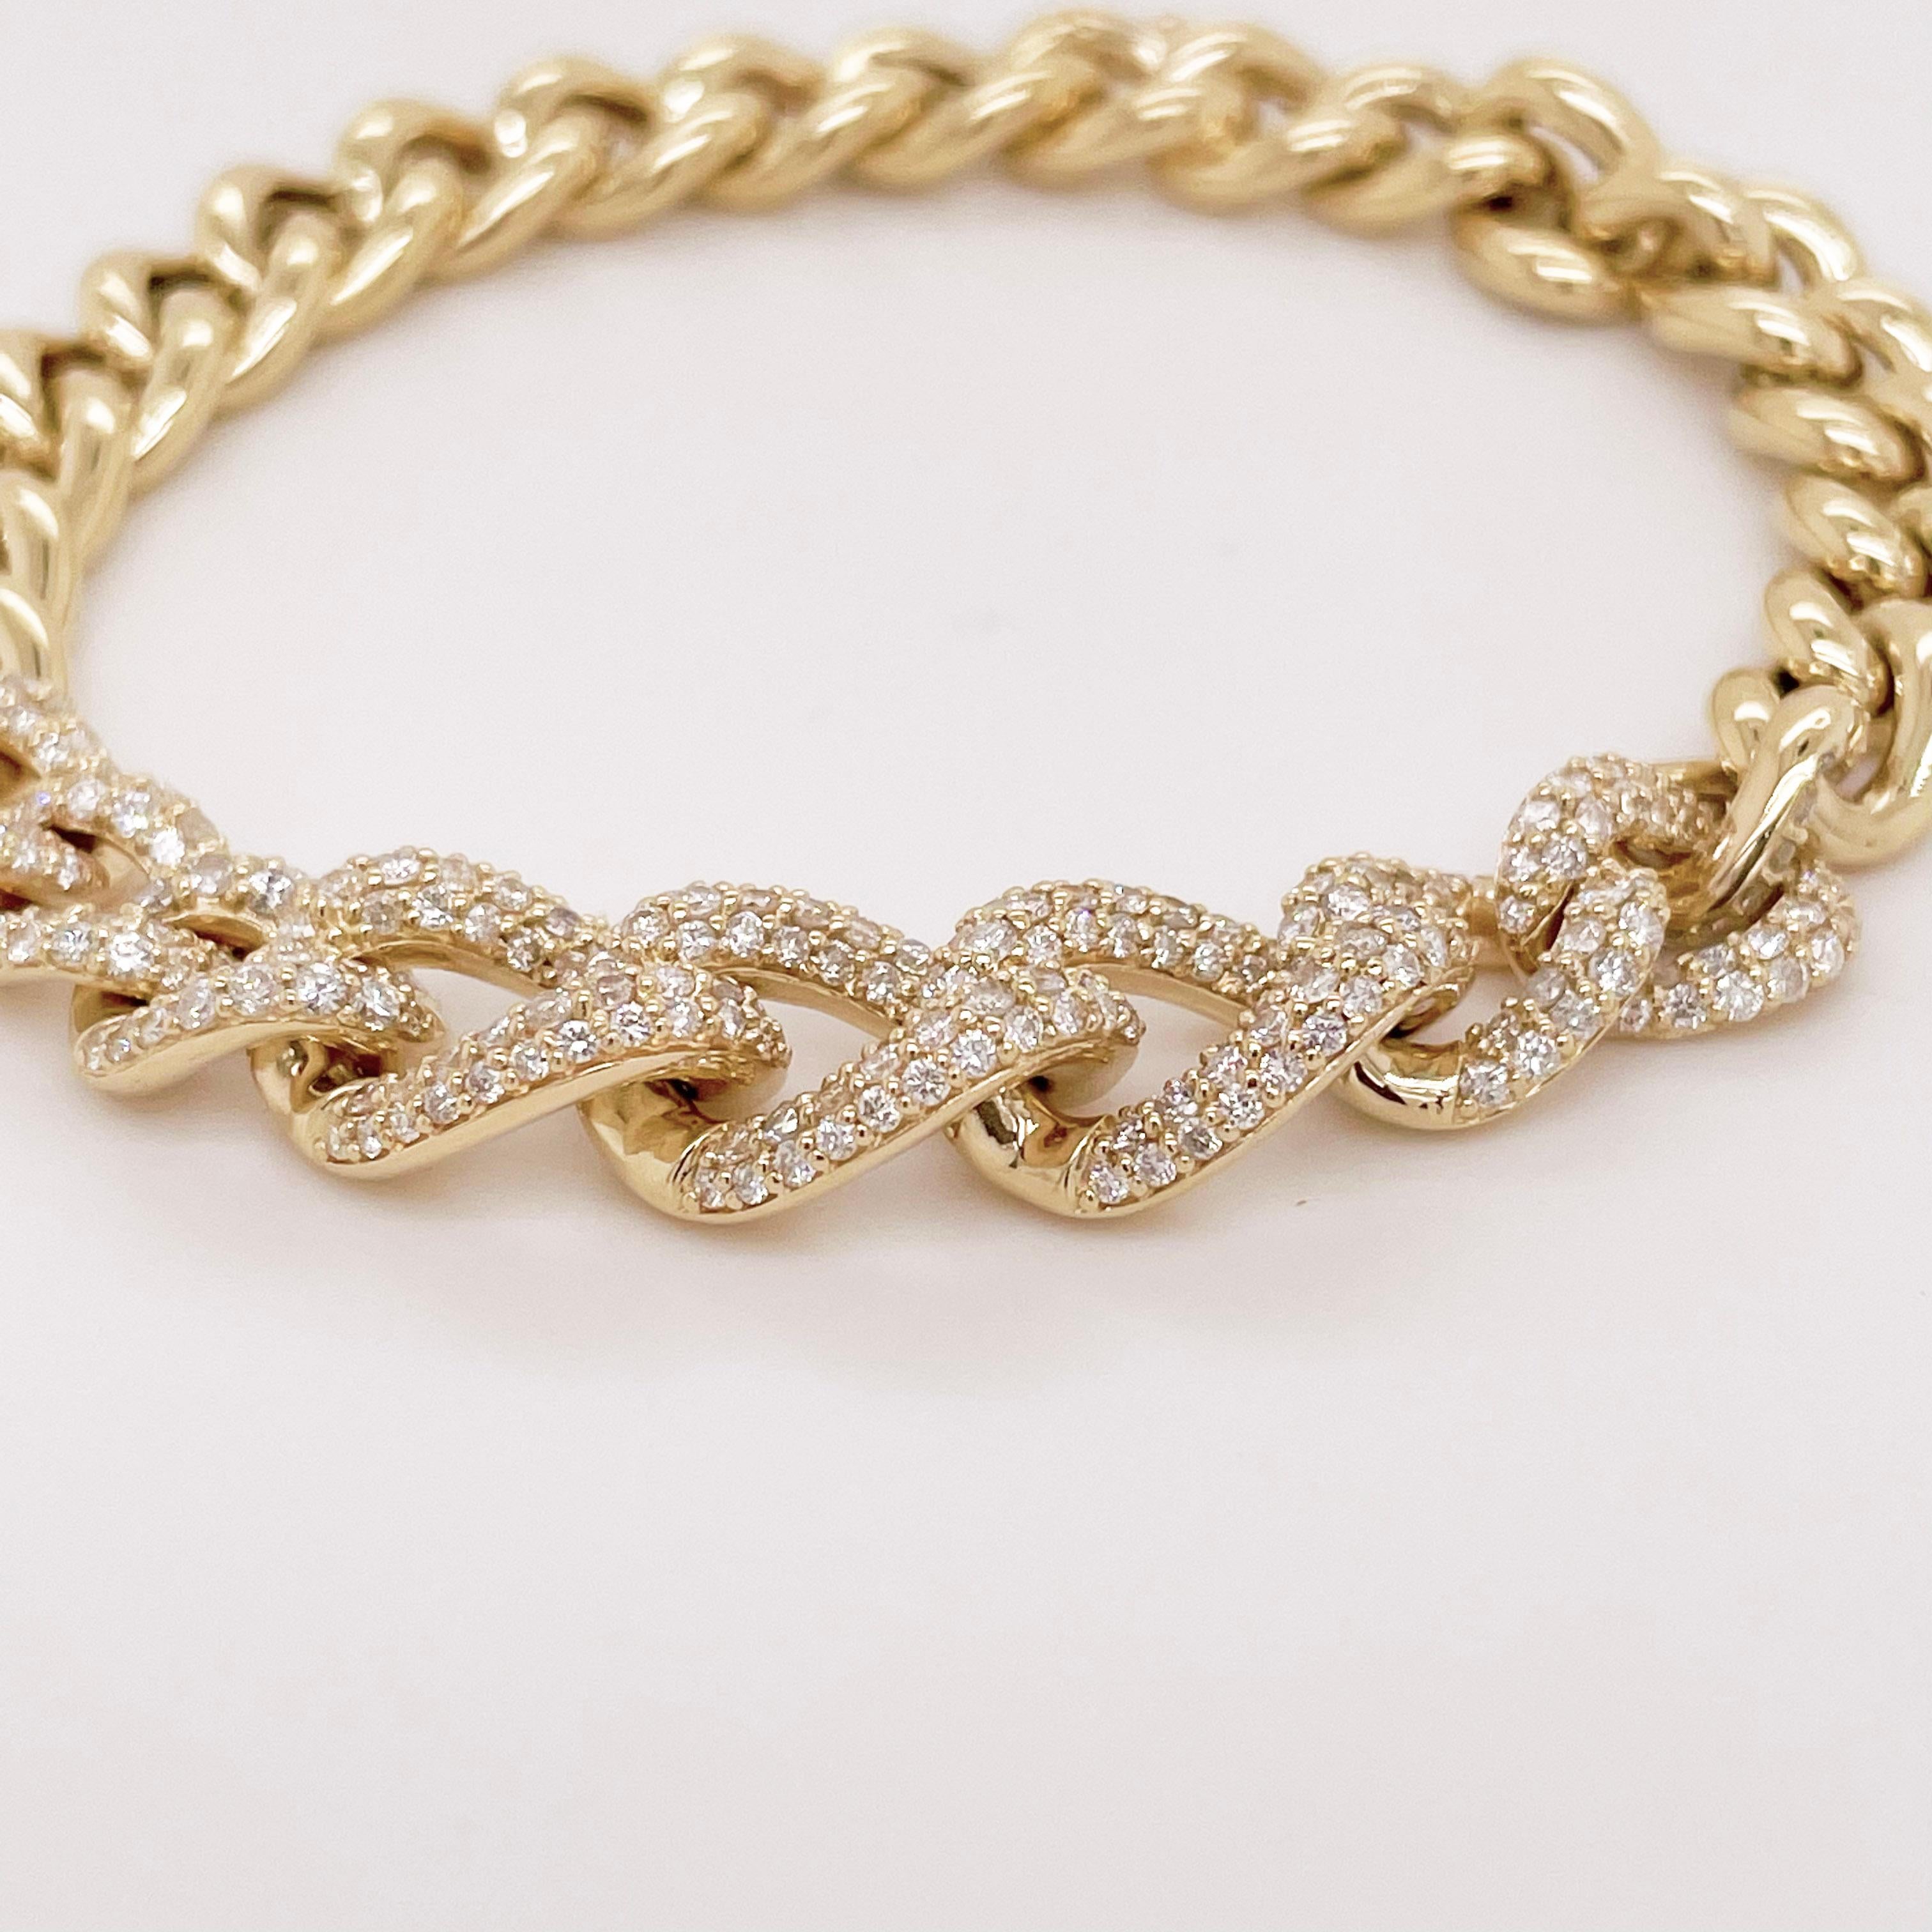 This gorgeous Miami Cuban diamond enhanced bracelet is perfect for every occasion. The beautiful 2.72 carats are delicately set in 14 karat yellow gold giving a new and original take on the classic Miami Cuban. 

Metal Quality: 14K Yellow